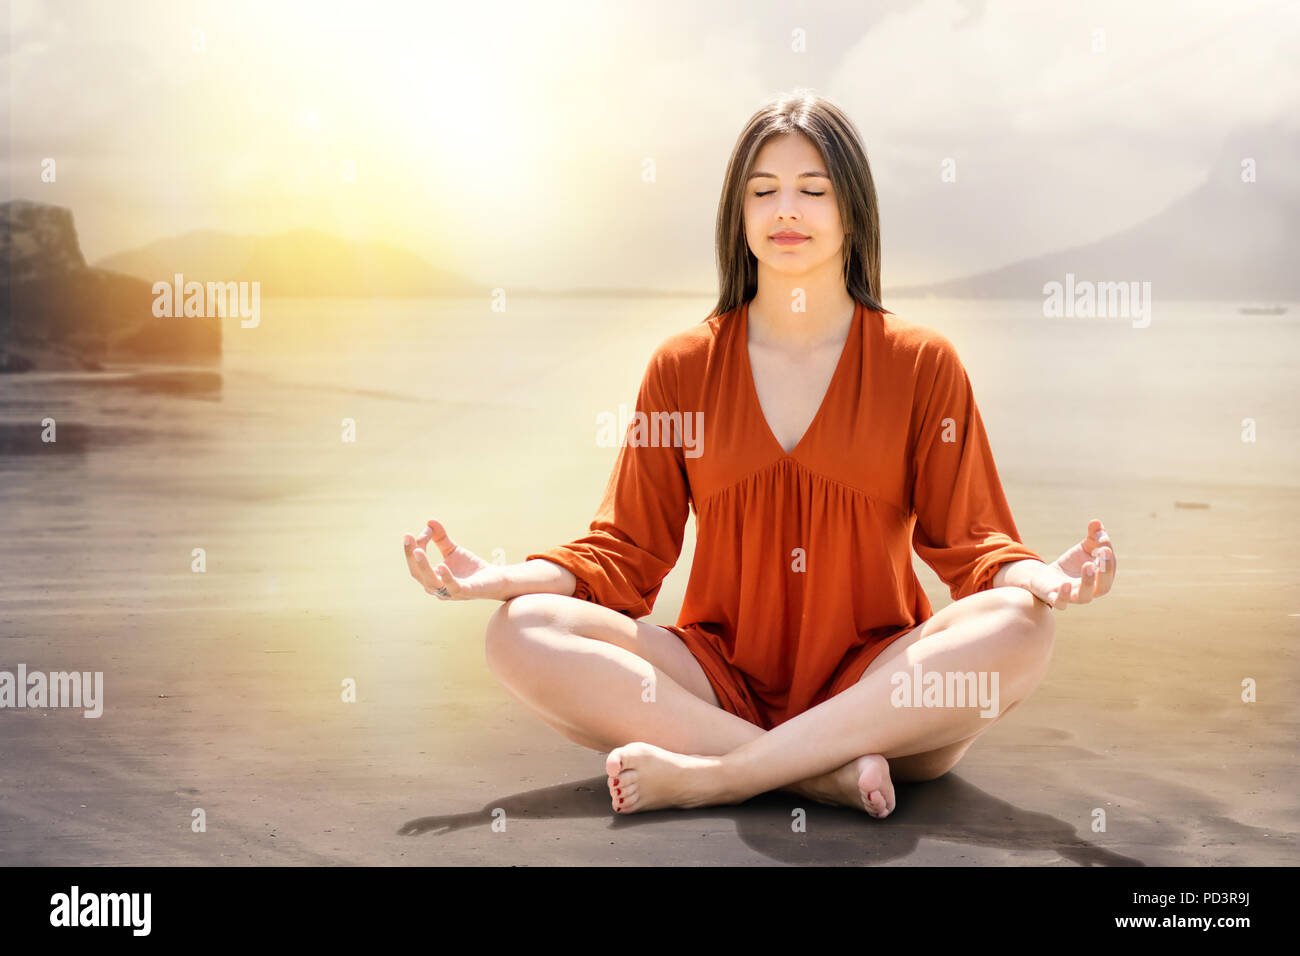 Portrait of young woman meditating at riverside. Girl sitting with eyes closed on sand against dreamy sunset background. Stock Photo